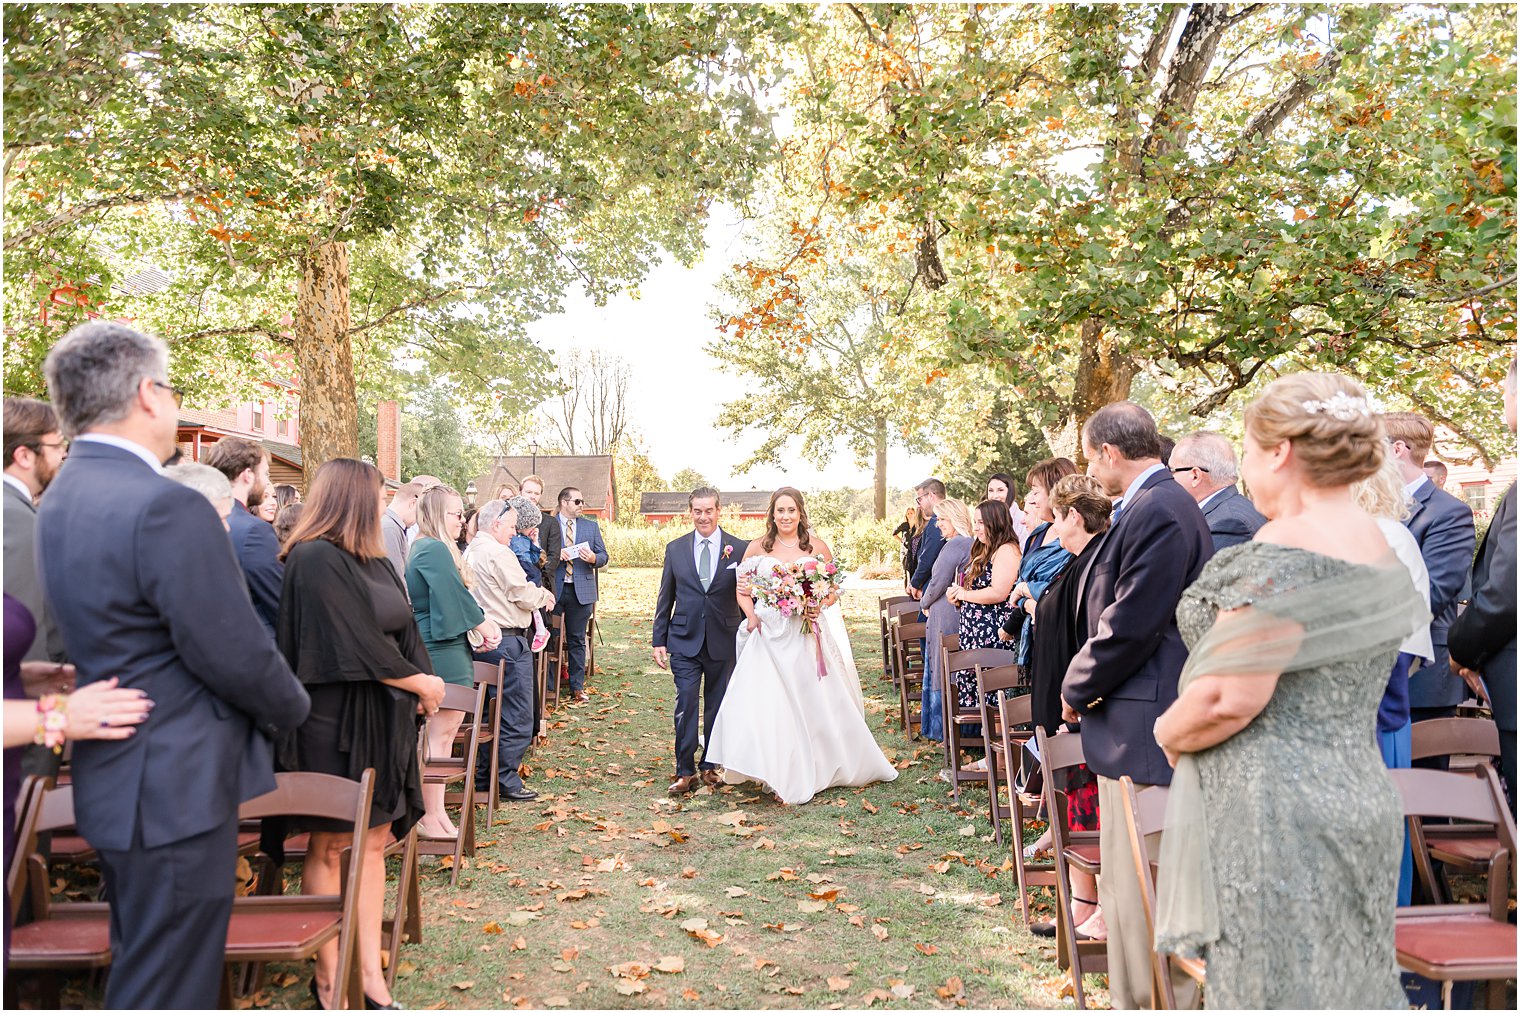 bride walks with dad up aisle at fall wedding ceremony outdoors on lawn at Bishop Hall Farmstead